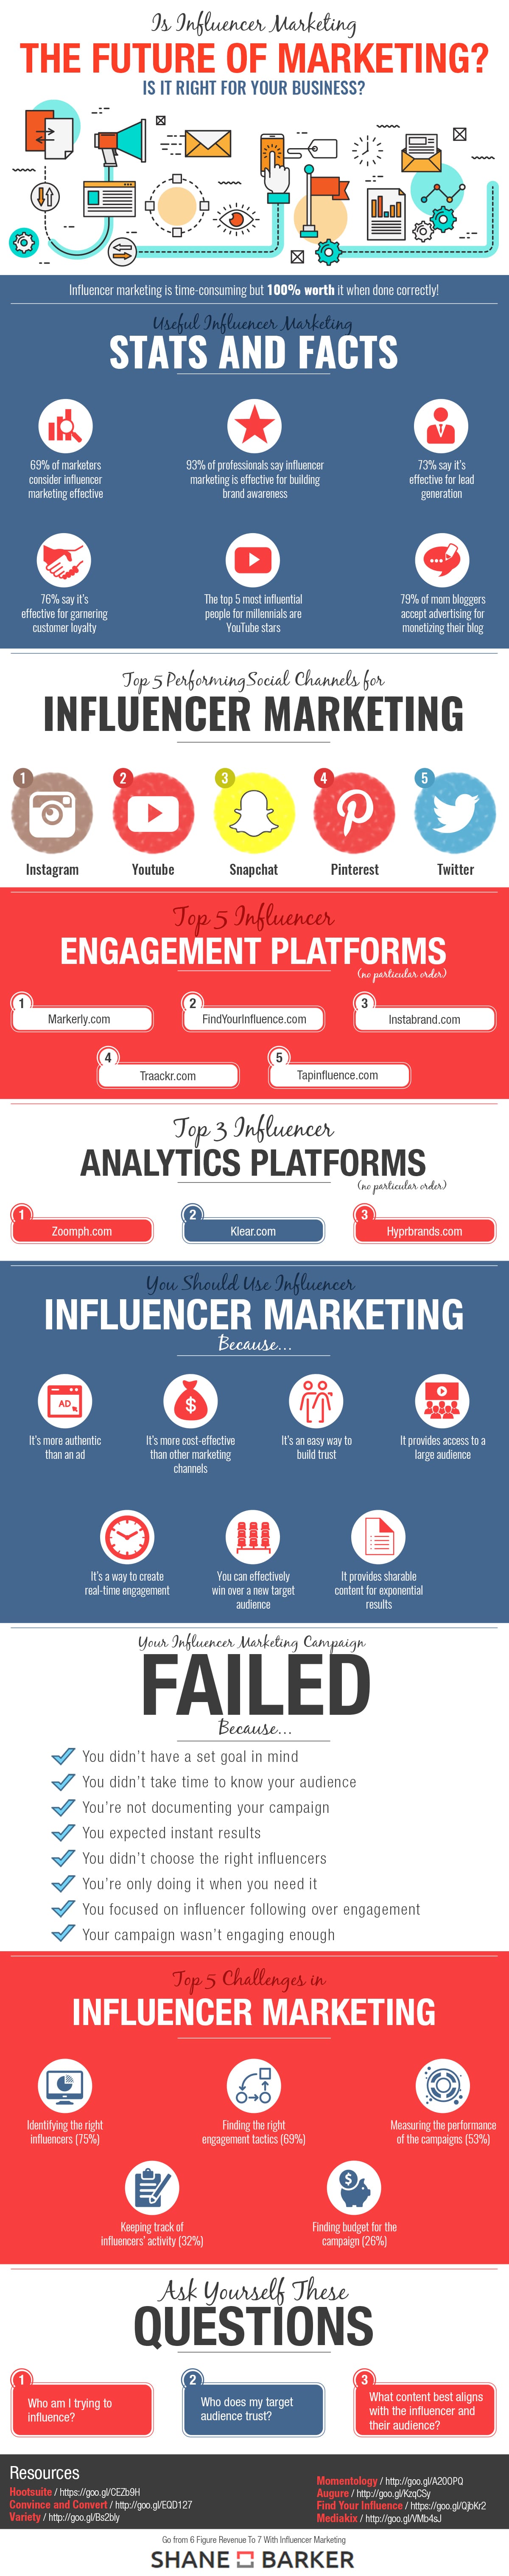 is influencer marketing the future of marketing